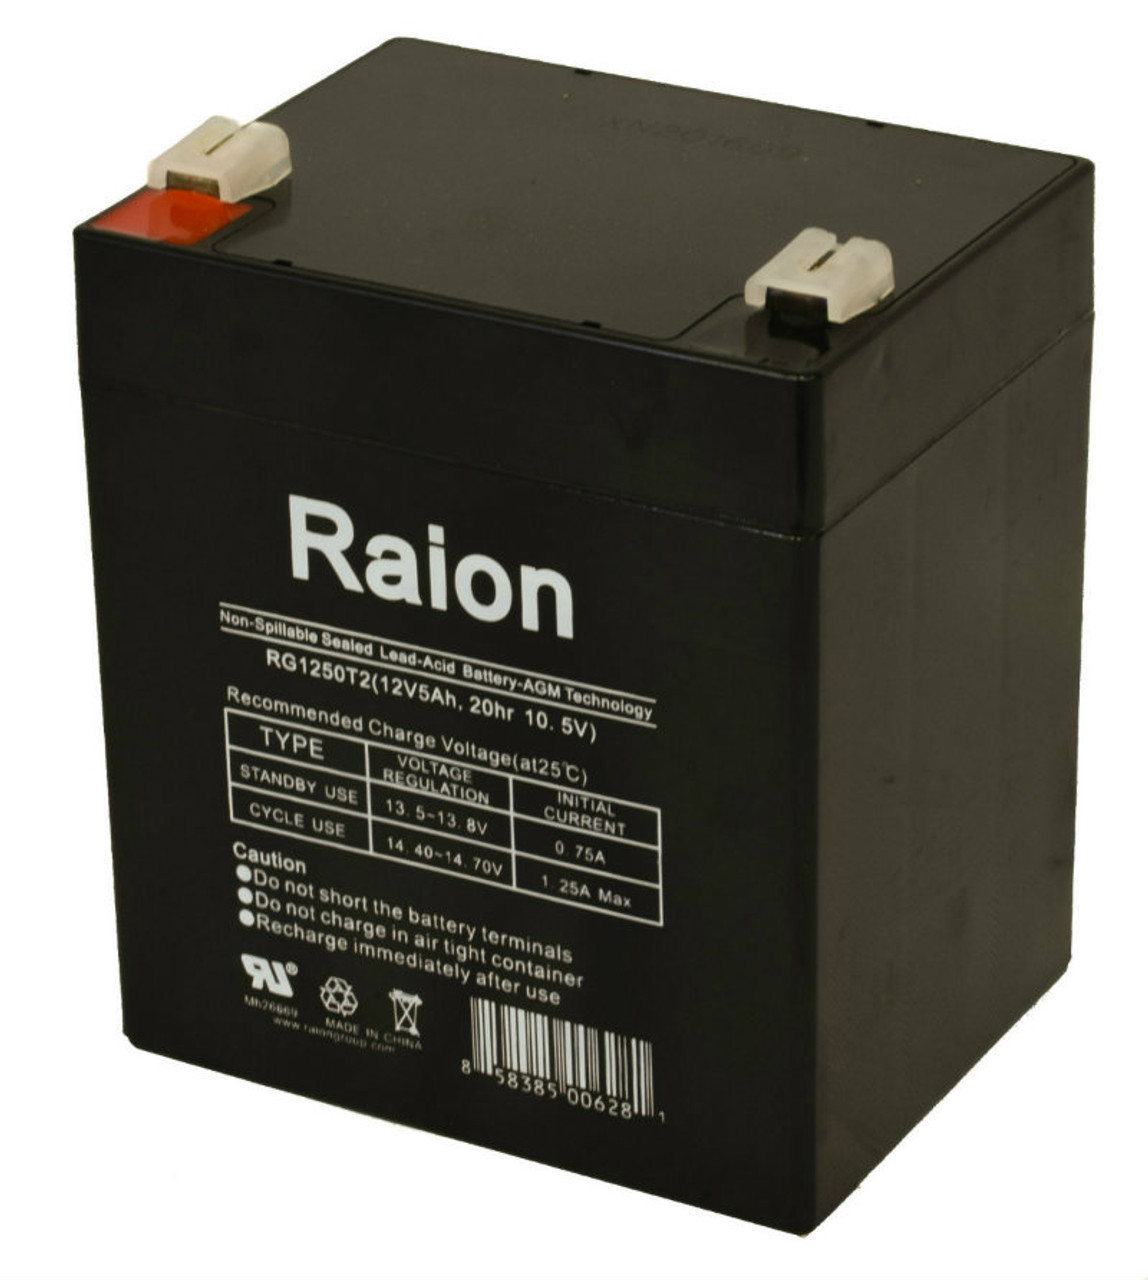 Raion Power RG1250T1 Replacement Alarm Security System Battery for GE Security Caddx B1245